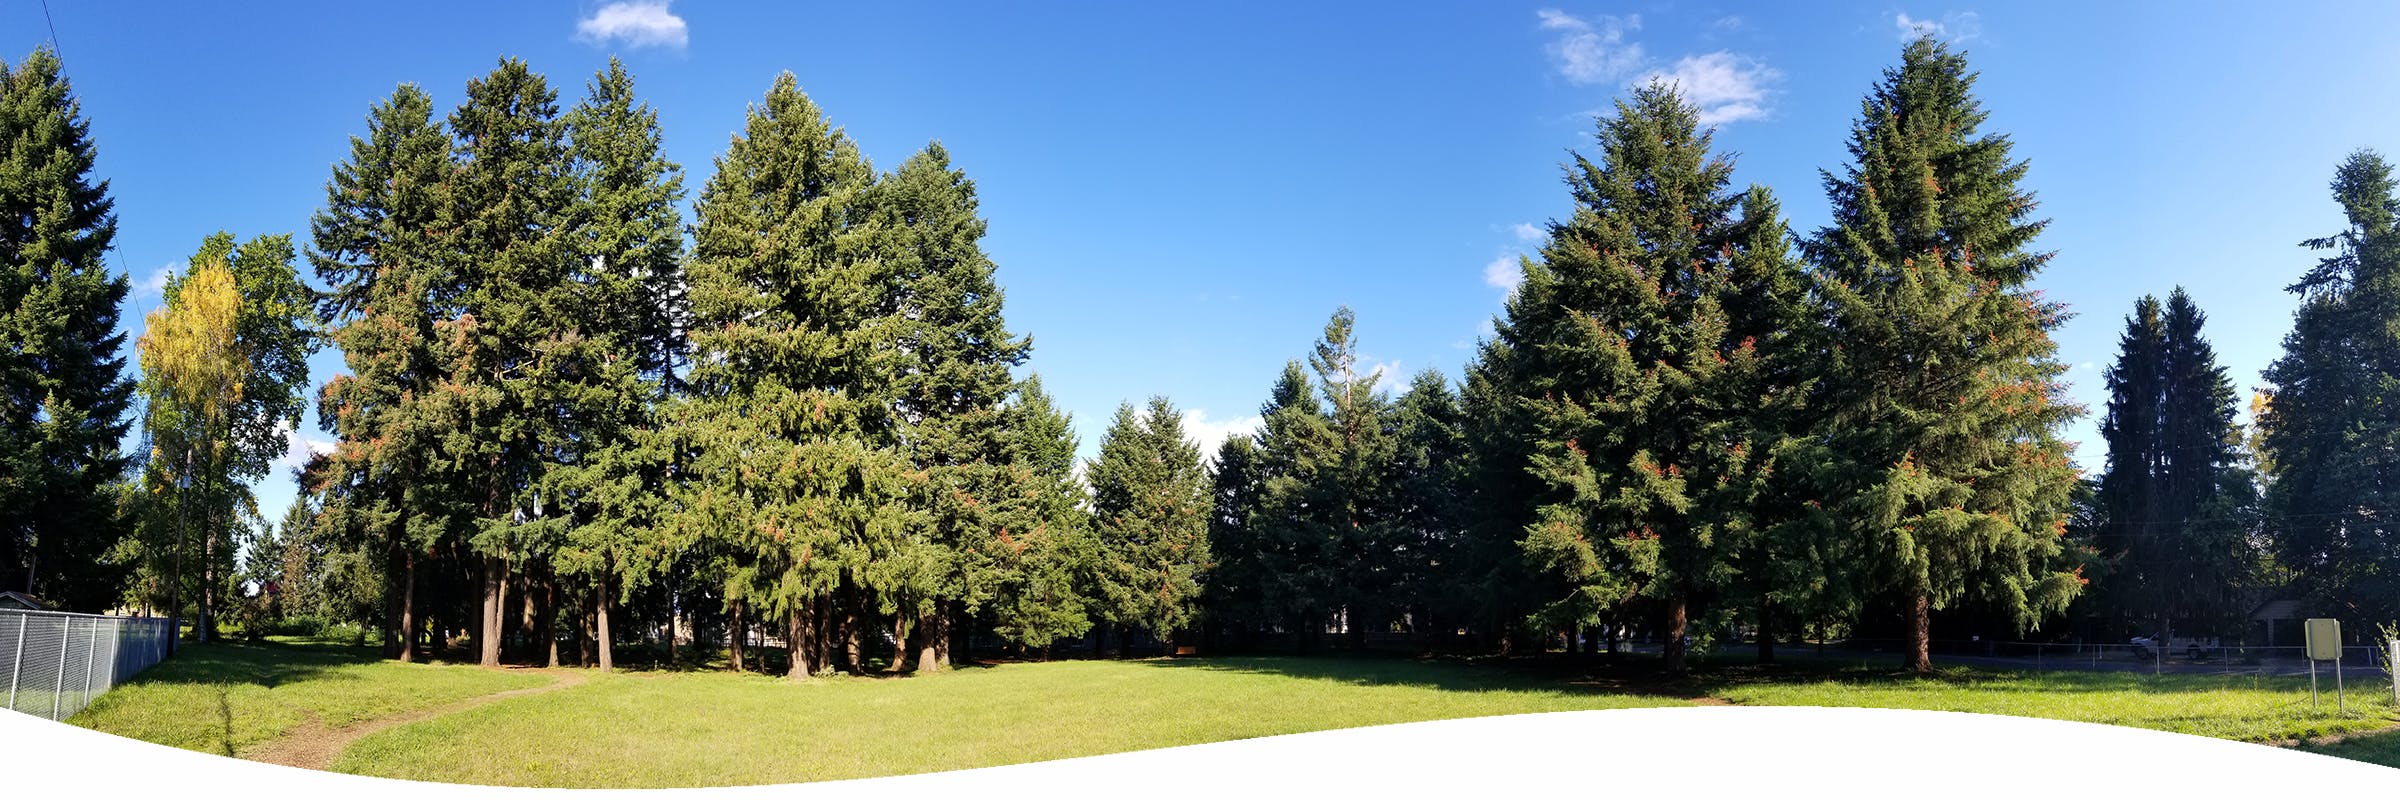 Panoramic image of Shaffer Park with a grassy field surrounded by various evergreen trees. There is a dirt trail on the left.